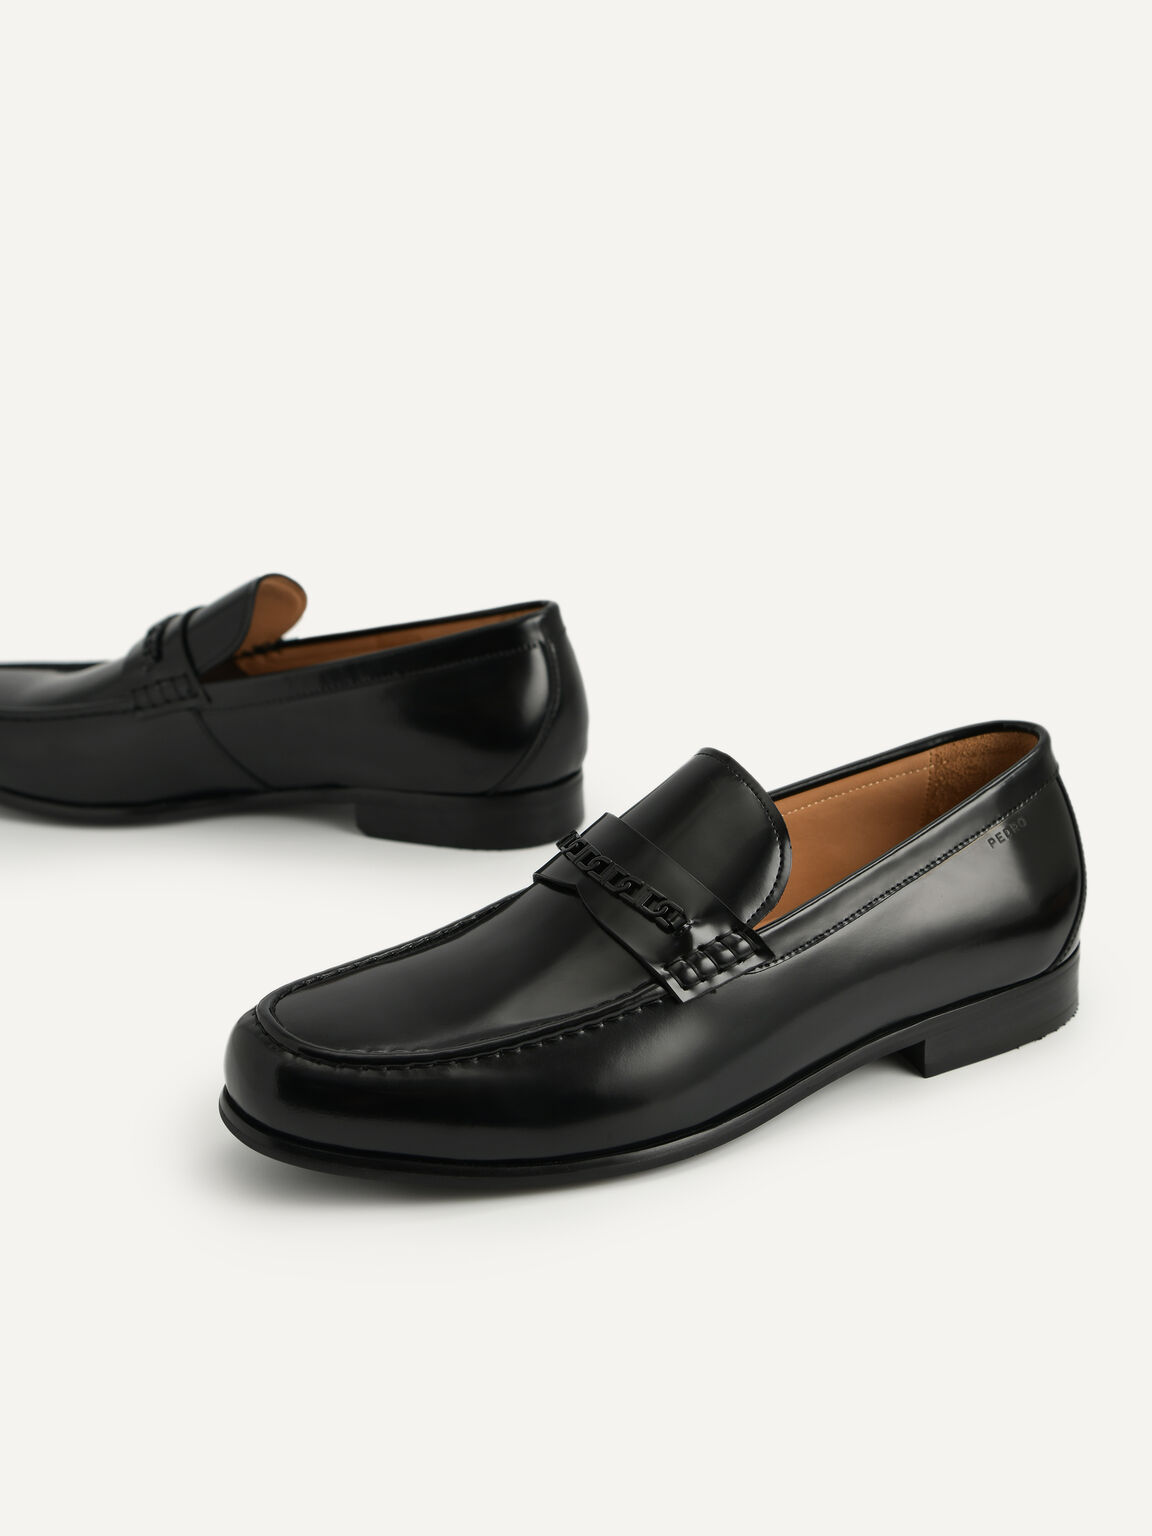 Black Icon Leather Penny Loafers - PEDRO SG